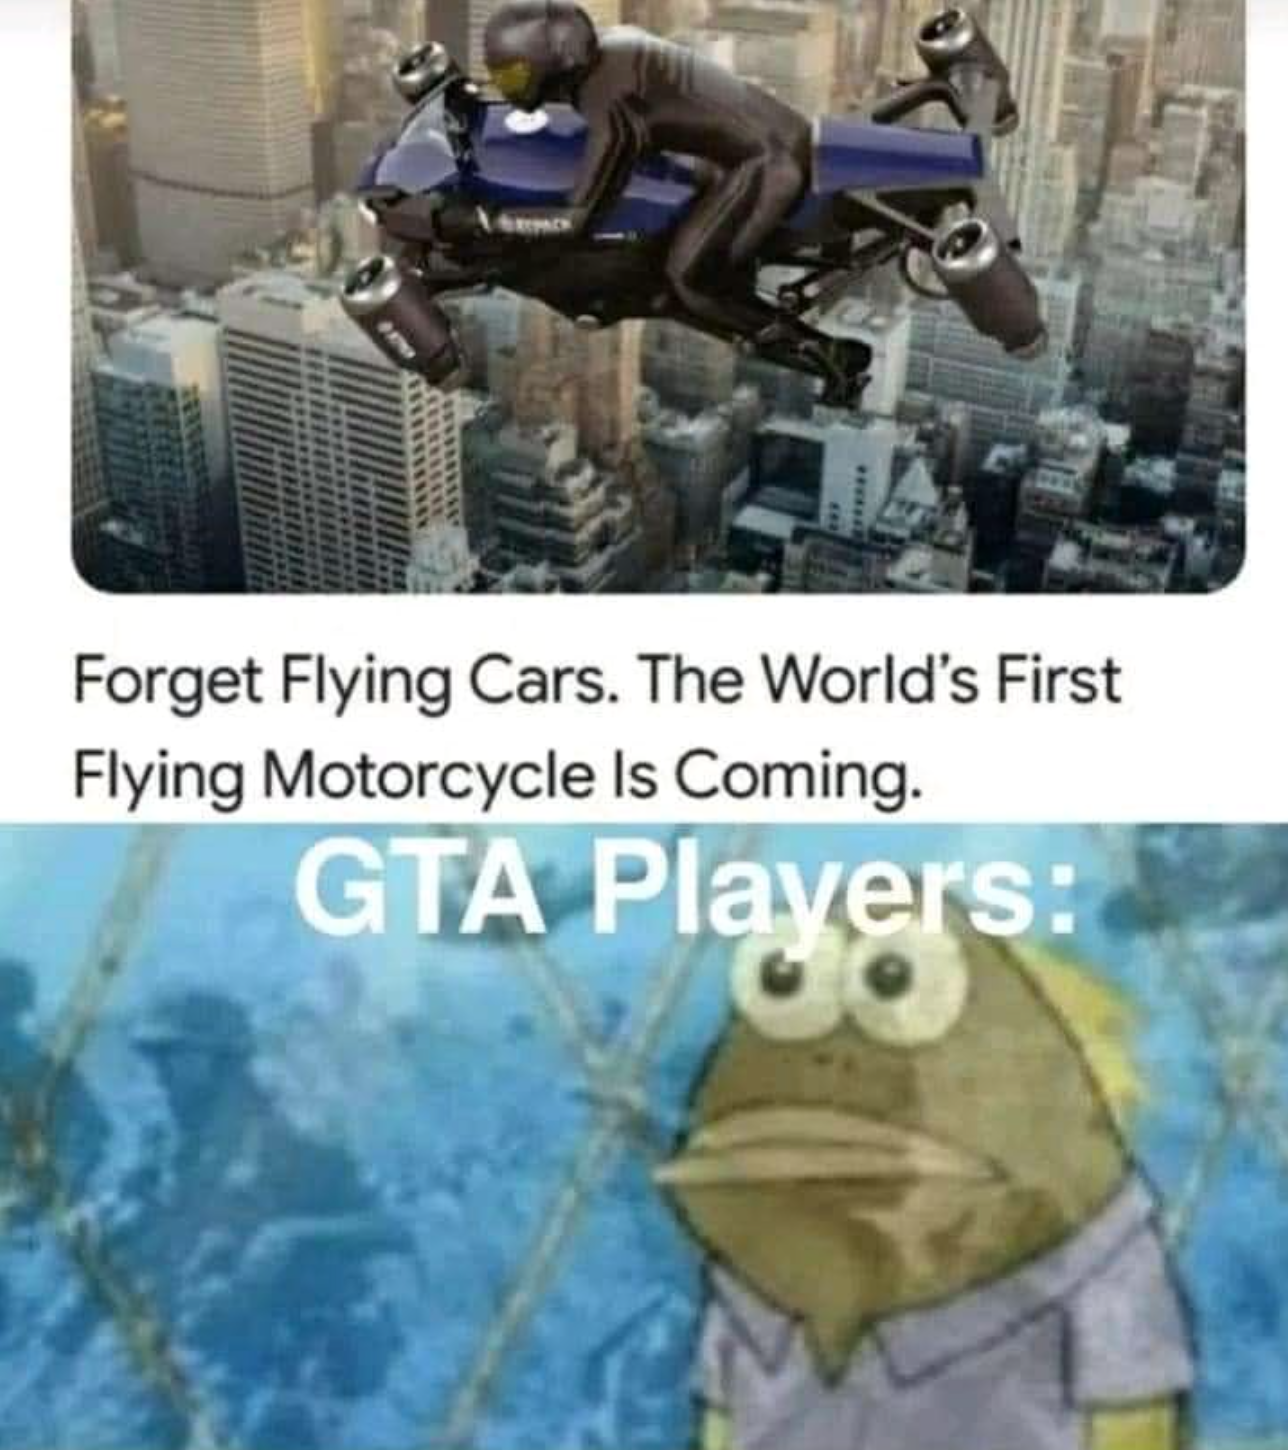 funny gaming memes - forget flying cars the world's first flying motorcycle is coming - Forget Flying Cars. The World's First Flying Motorcycle Is Coming. Gta Plavers